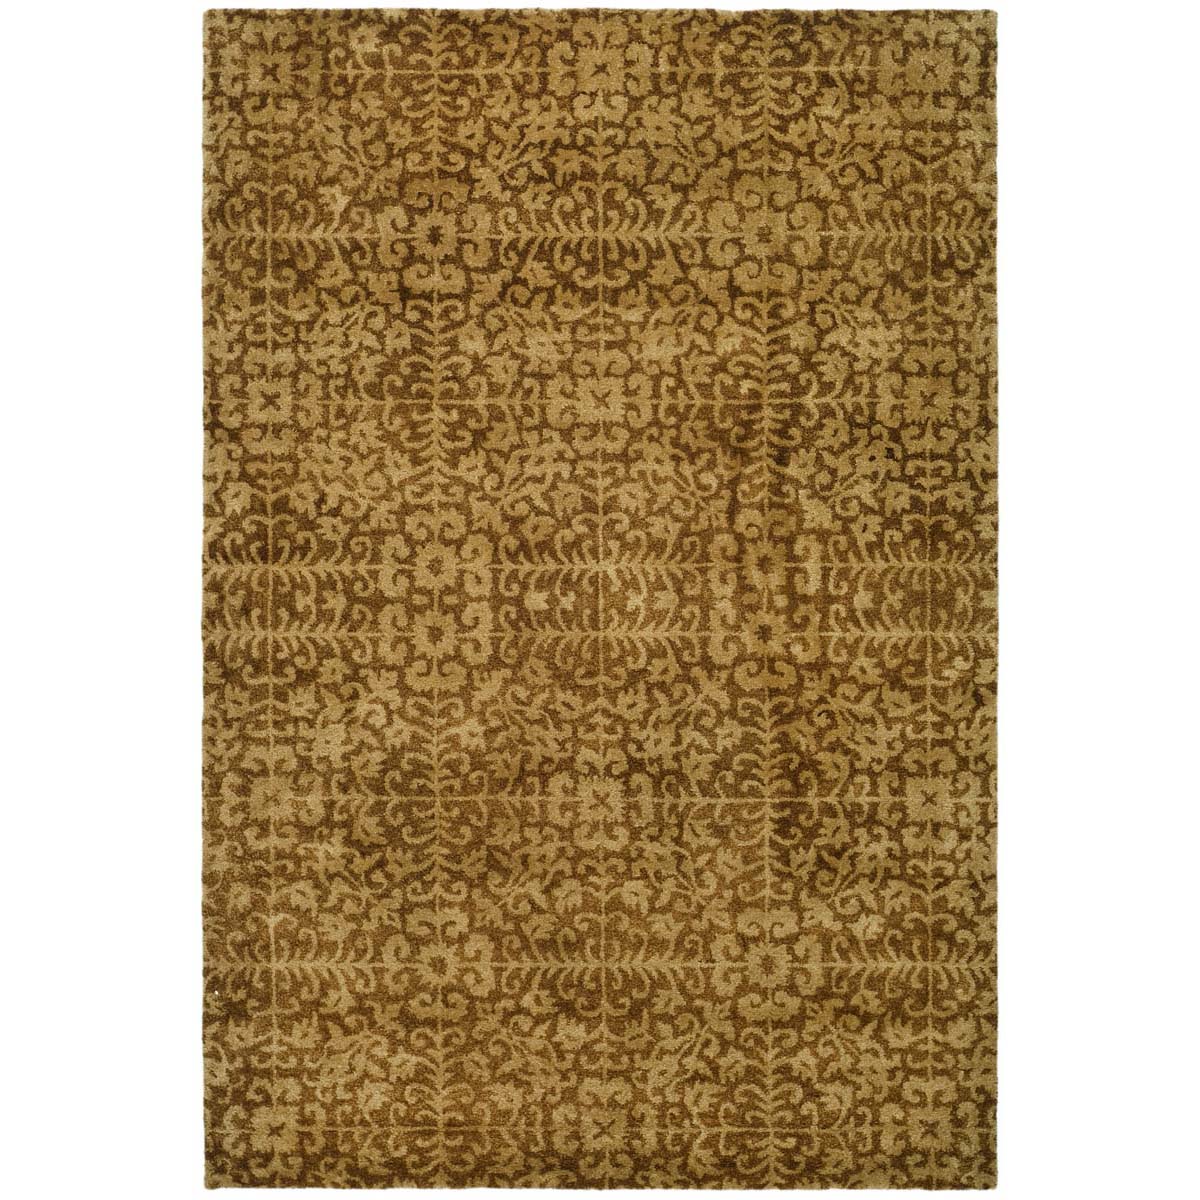 Safavieh Antiquity 11A Rug, AT411A - Gold / Beige